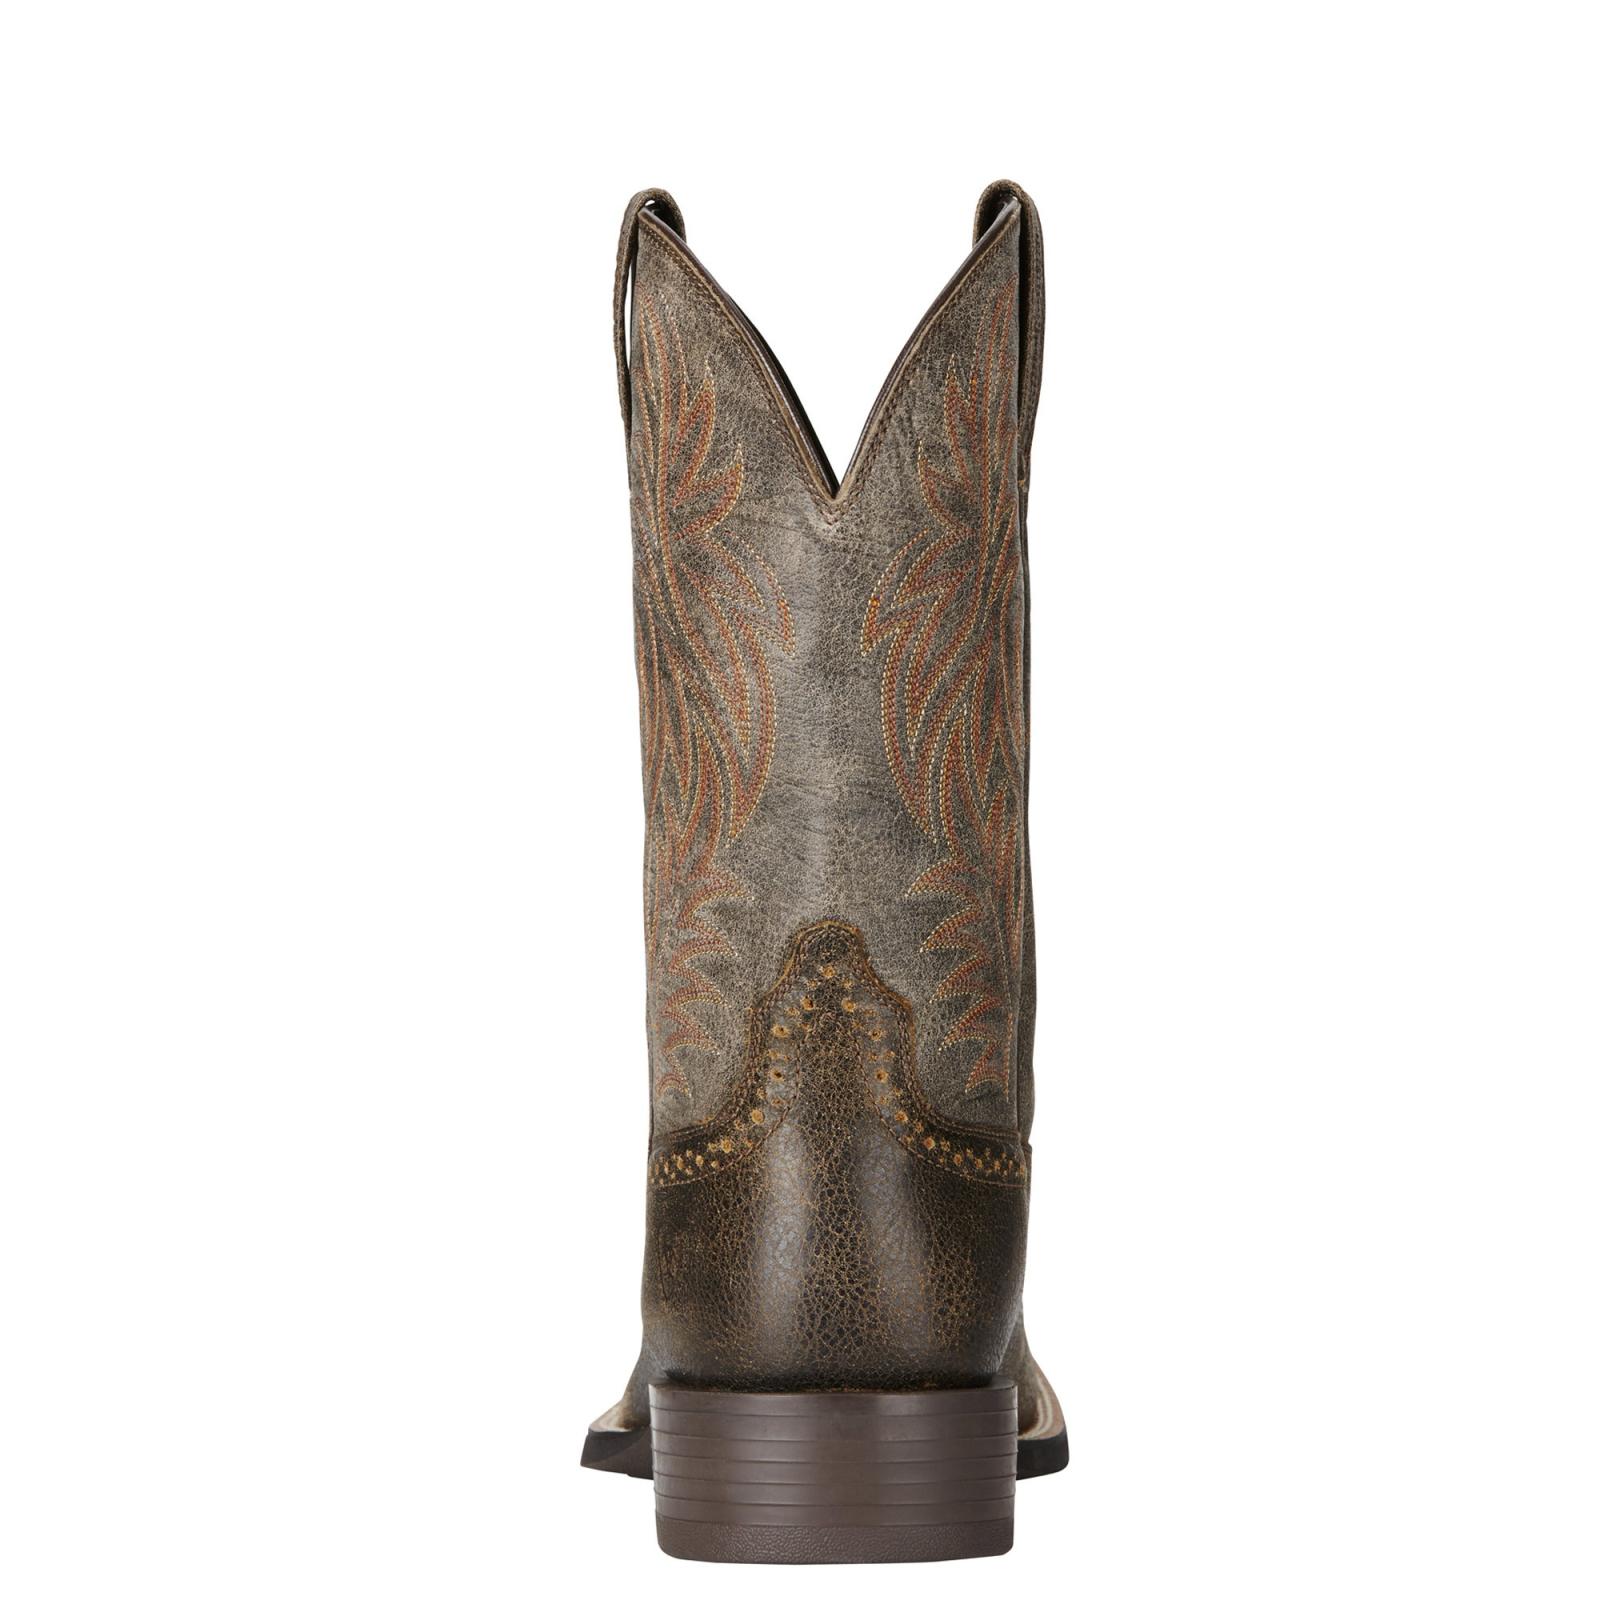 Ariat Sport Wide Square Toe Western Boot 